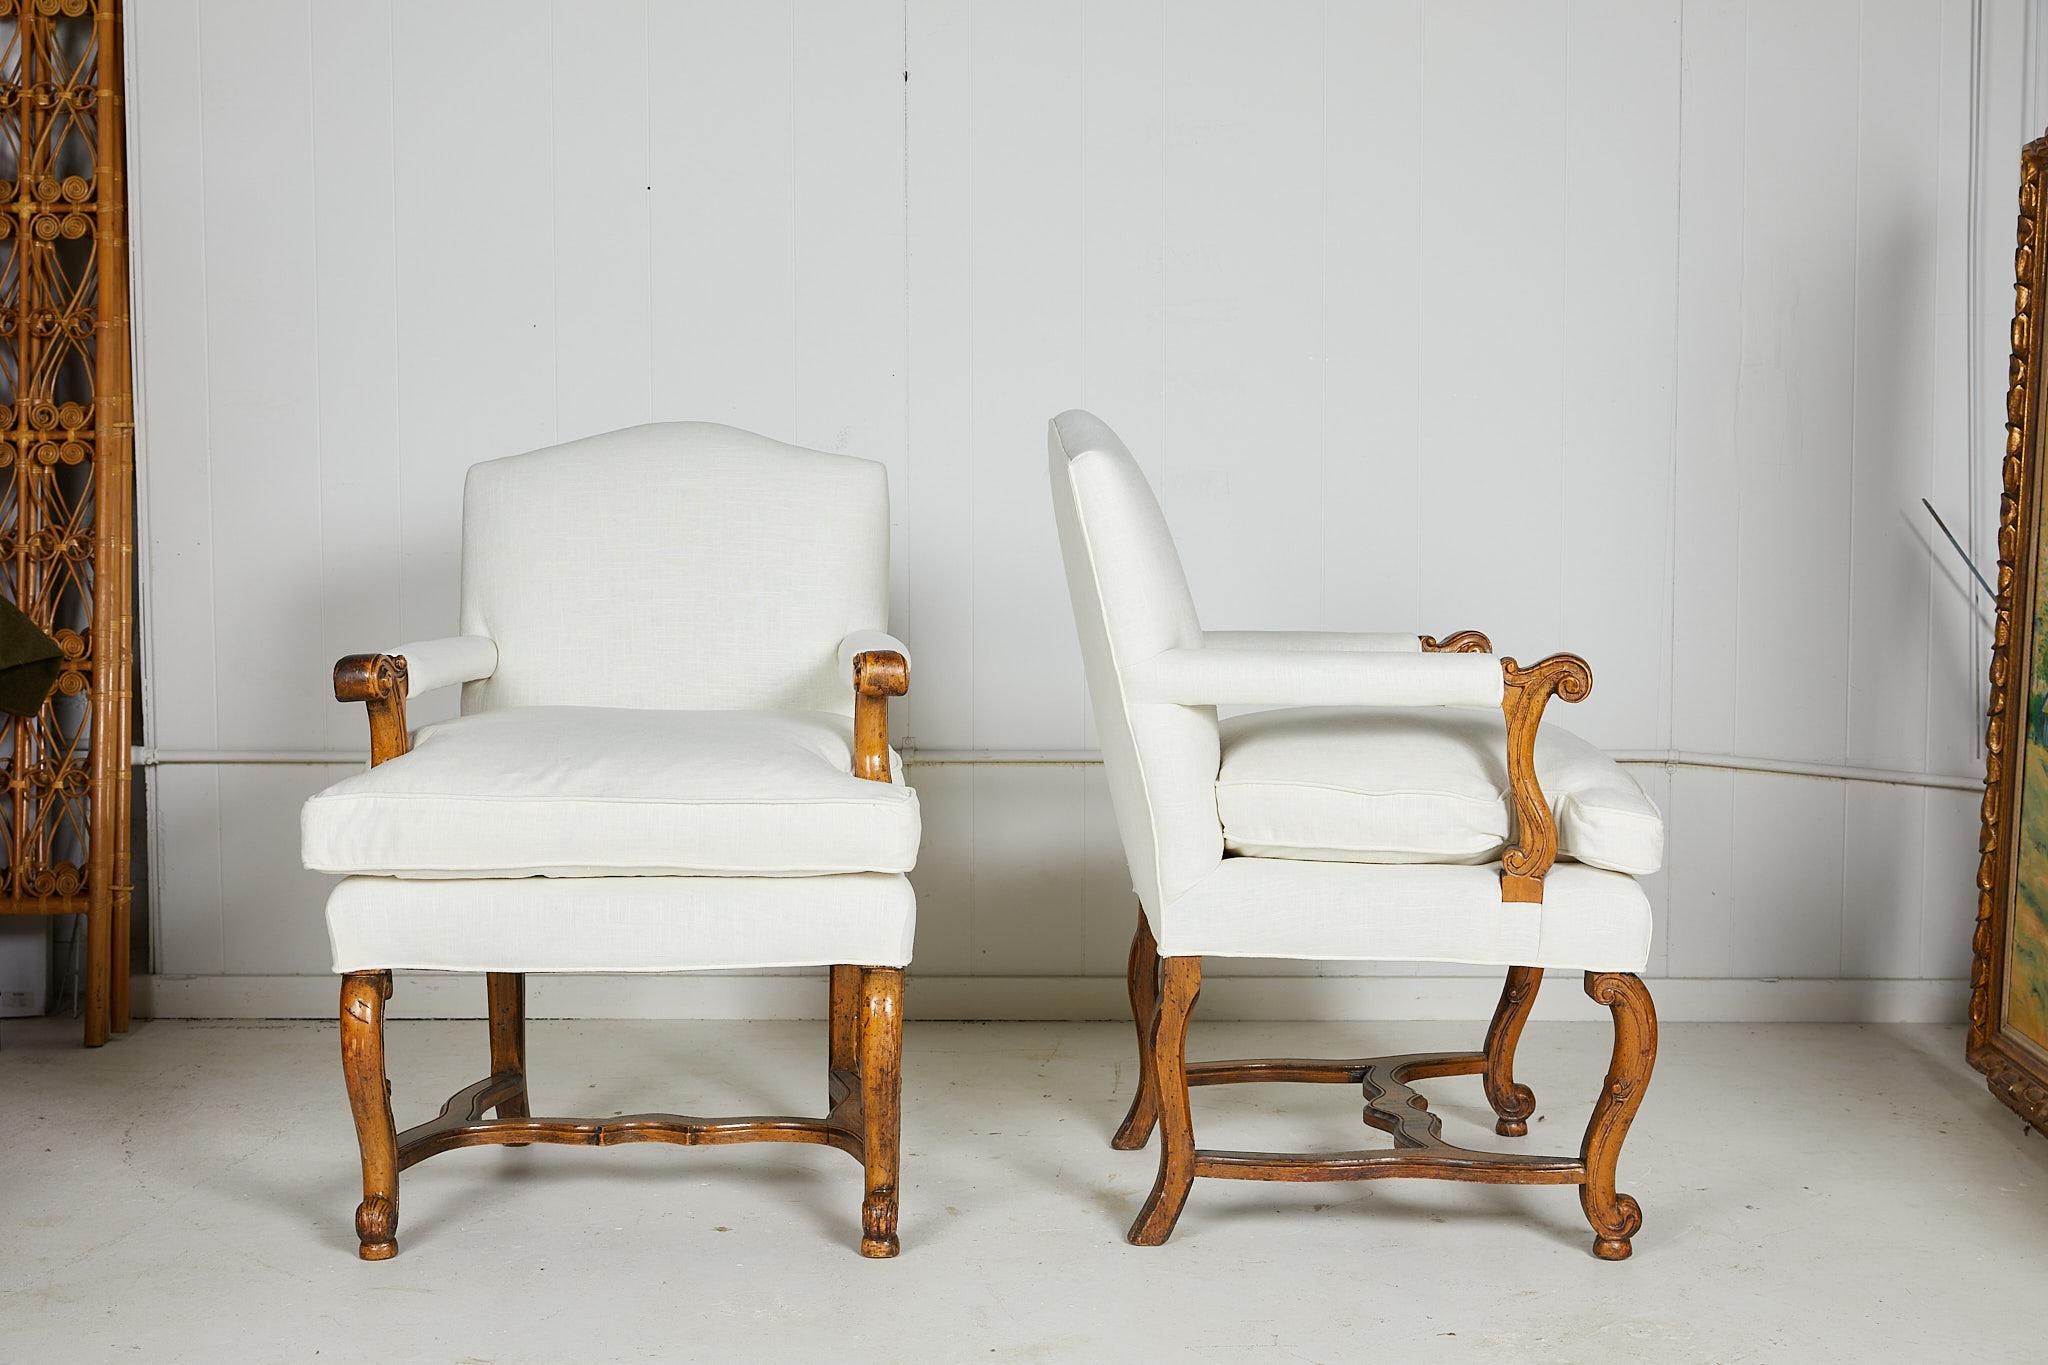 Pair of 20th century Italian open-arm bergère chairs having upholstered backs and seats and custom loose down removable cushions. The fruitwood finish wooden frames have scrolling arms and legs and shaped H-stretchers. The chairs have been newly